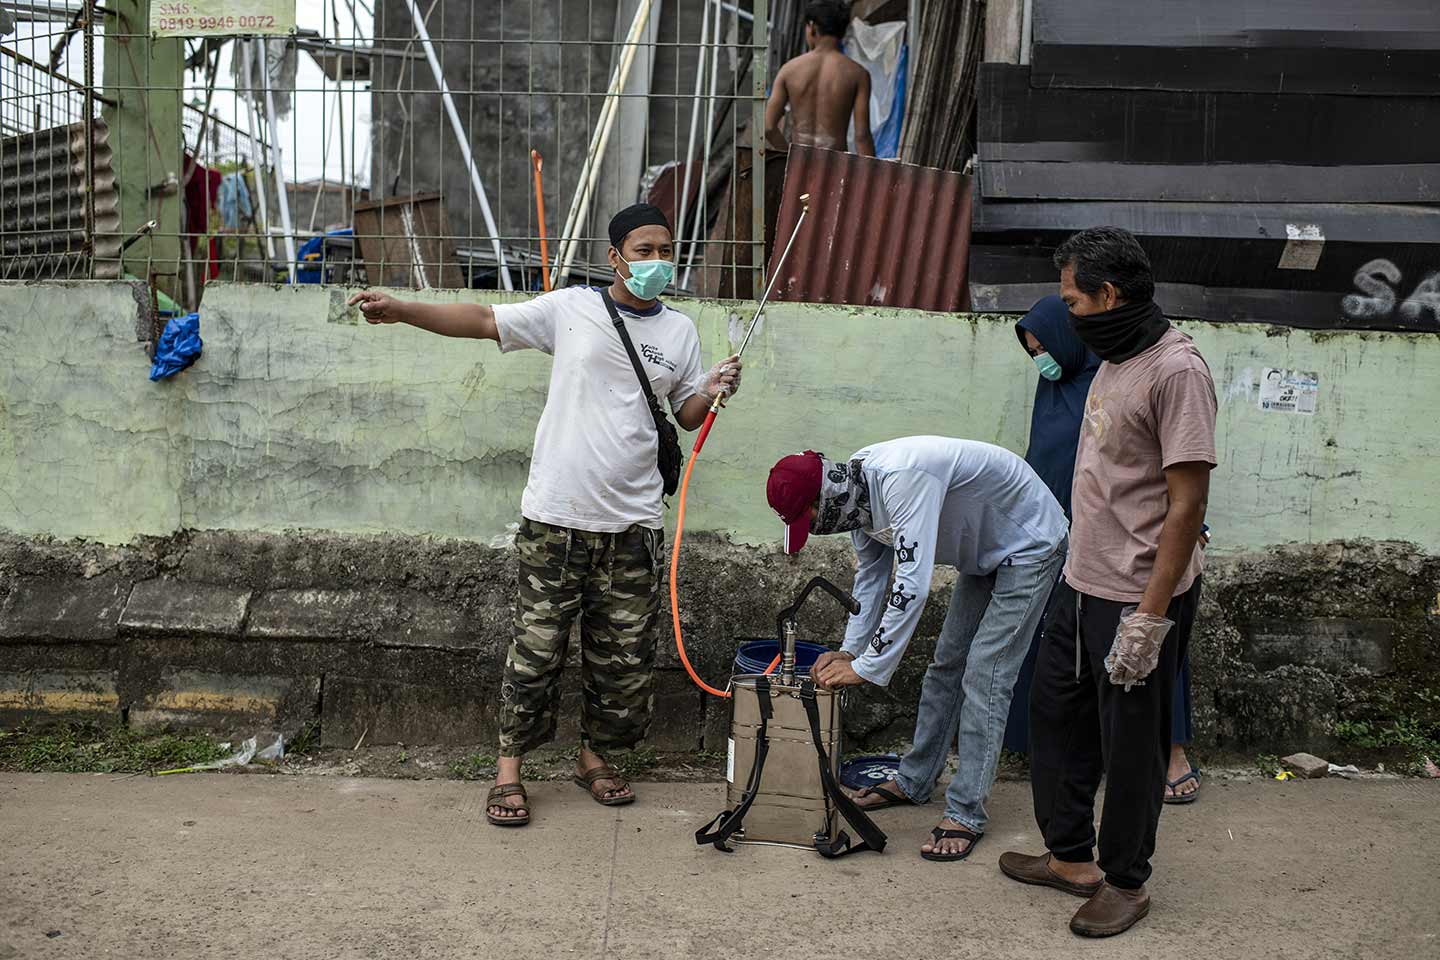 Residents spray disinfectants in their own neighborhoods to fight with Covid-19 in Jakarta, Indonesia in March, 2020. Residents take their own initiative to routinely spray disinfectants in their neighborhoods.  Credit: UNICEF/2020/Arimacs Wilander